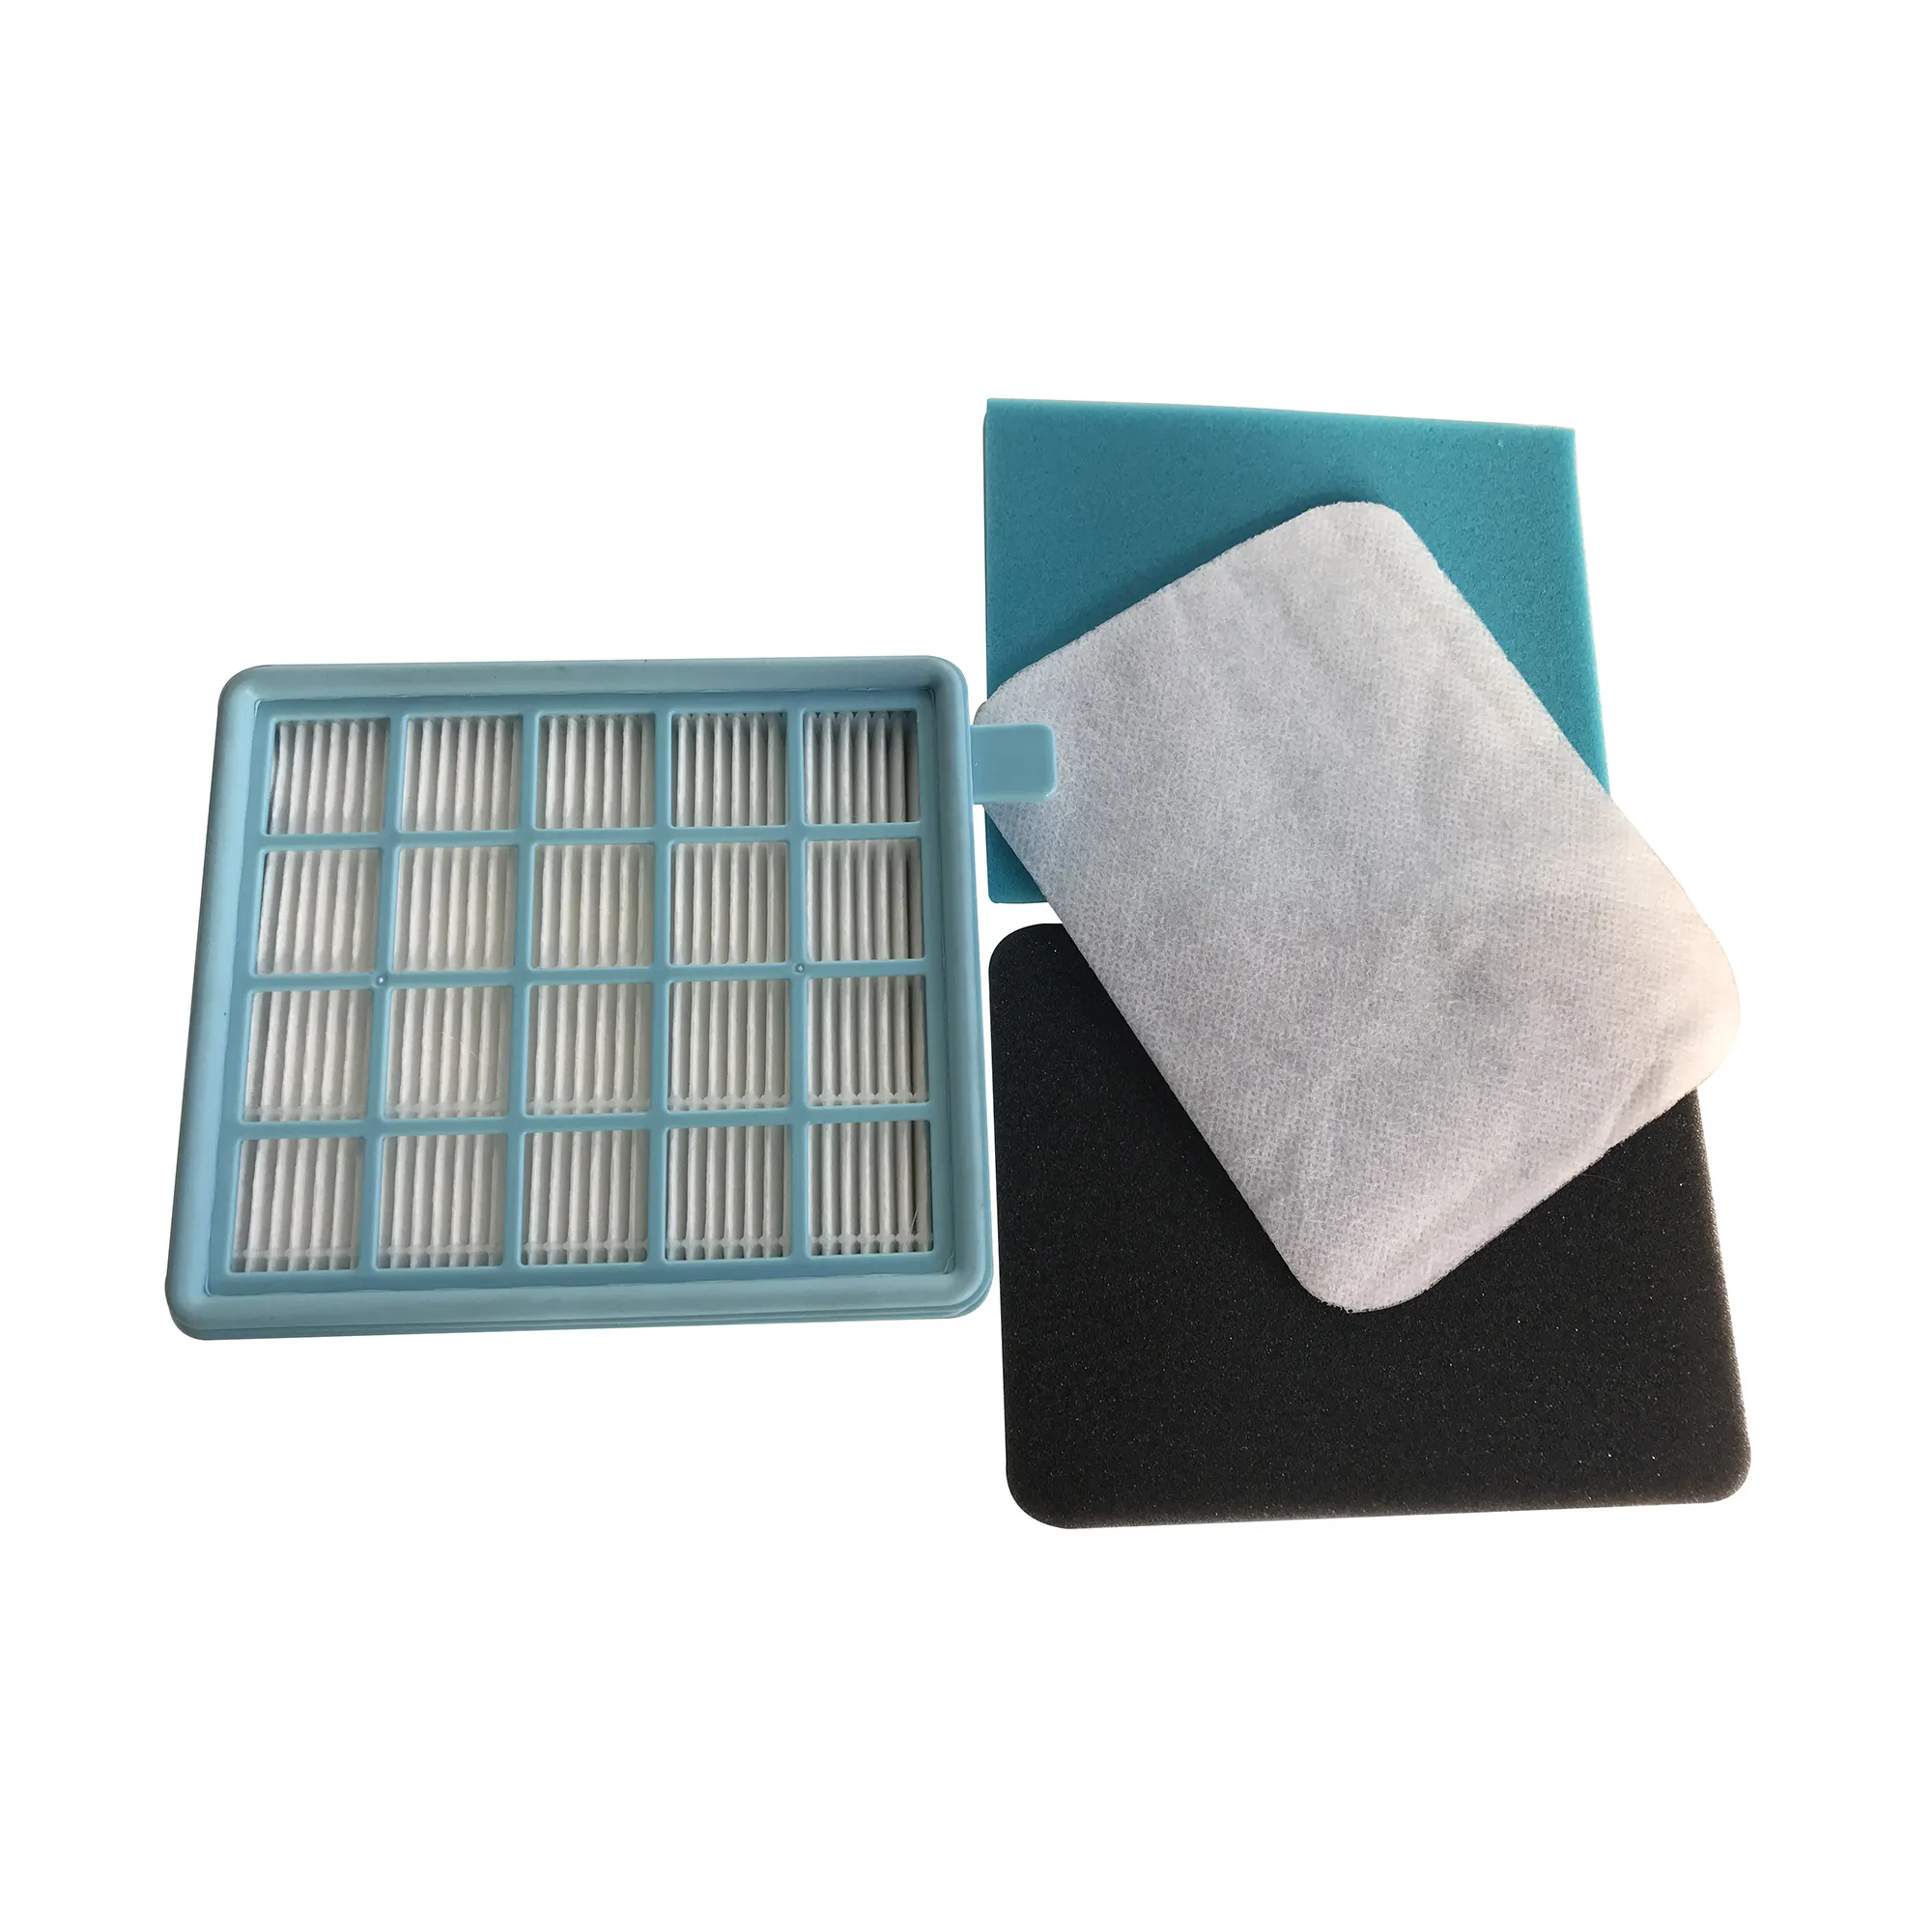 Vacuum Cleaner Parts Replacement for Phiipss FC8470 FC8471 FC9322 Vacuum Cleaner HEPA Filter